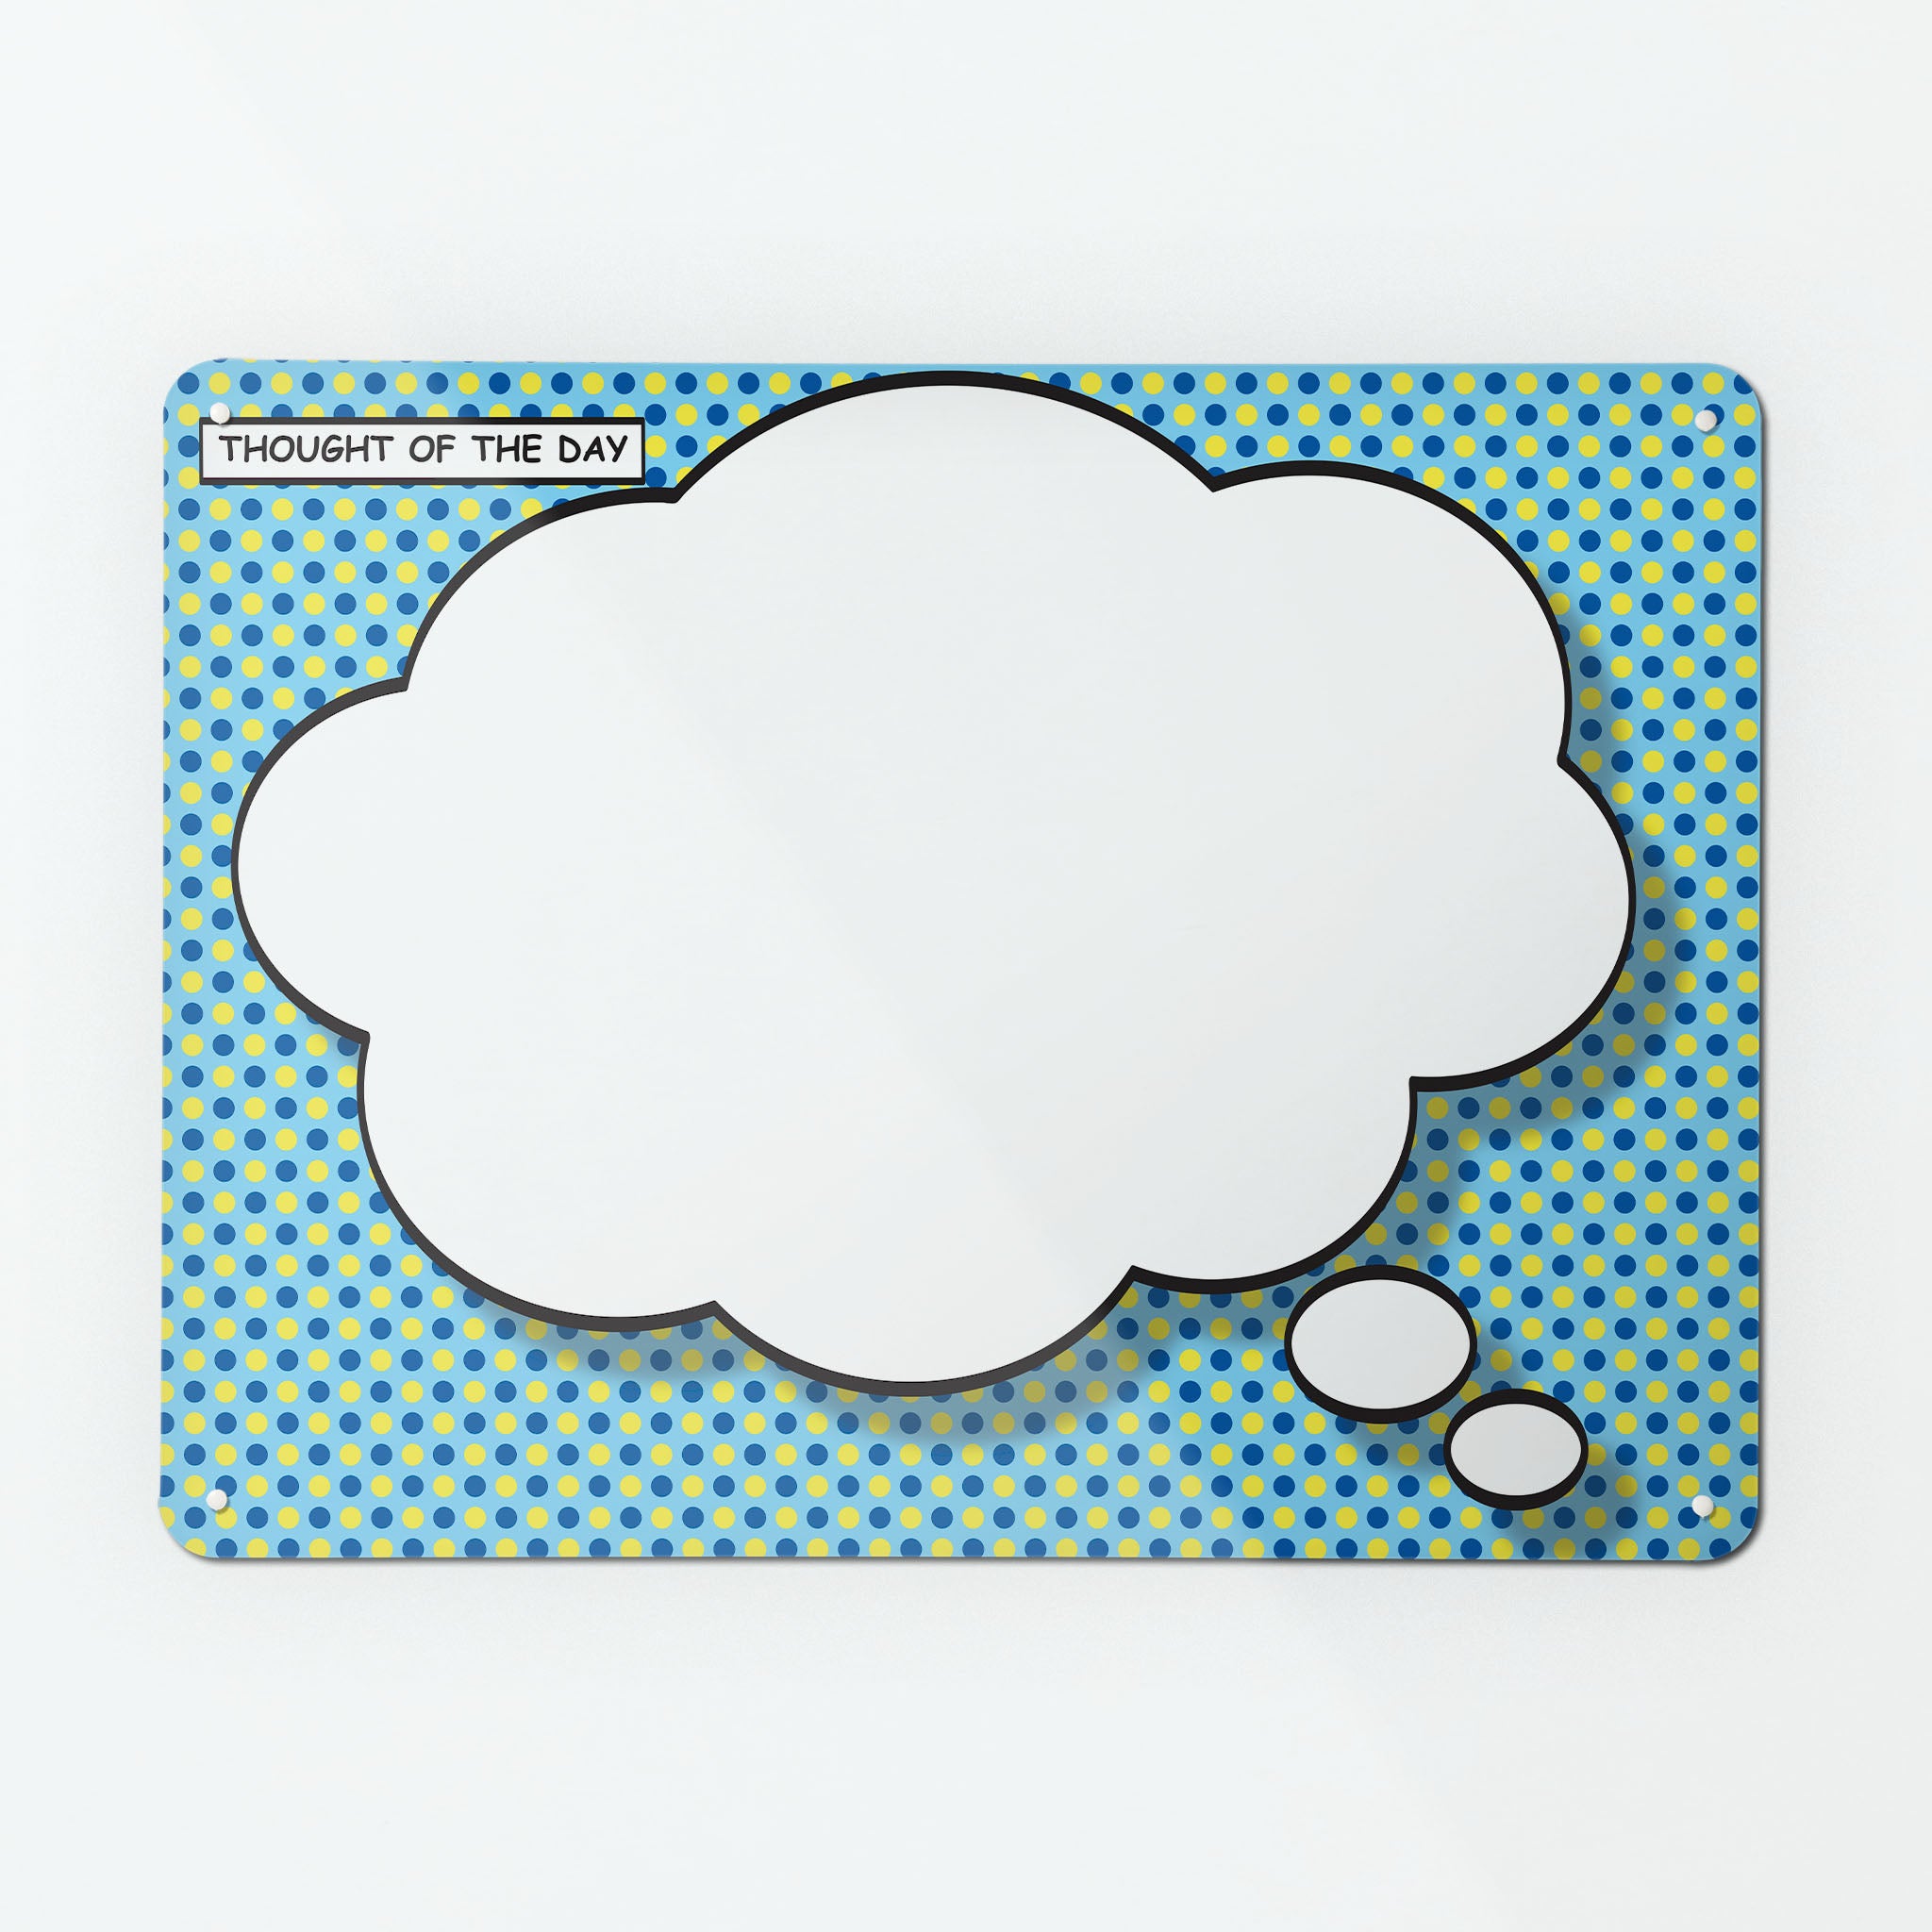 A large magnetic notice board by Beyond the Fridge with a cartoon thought bubble design in white on a blue and yellow background